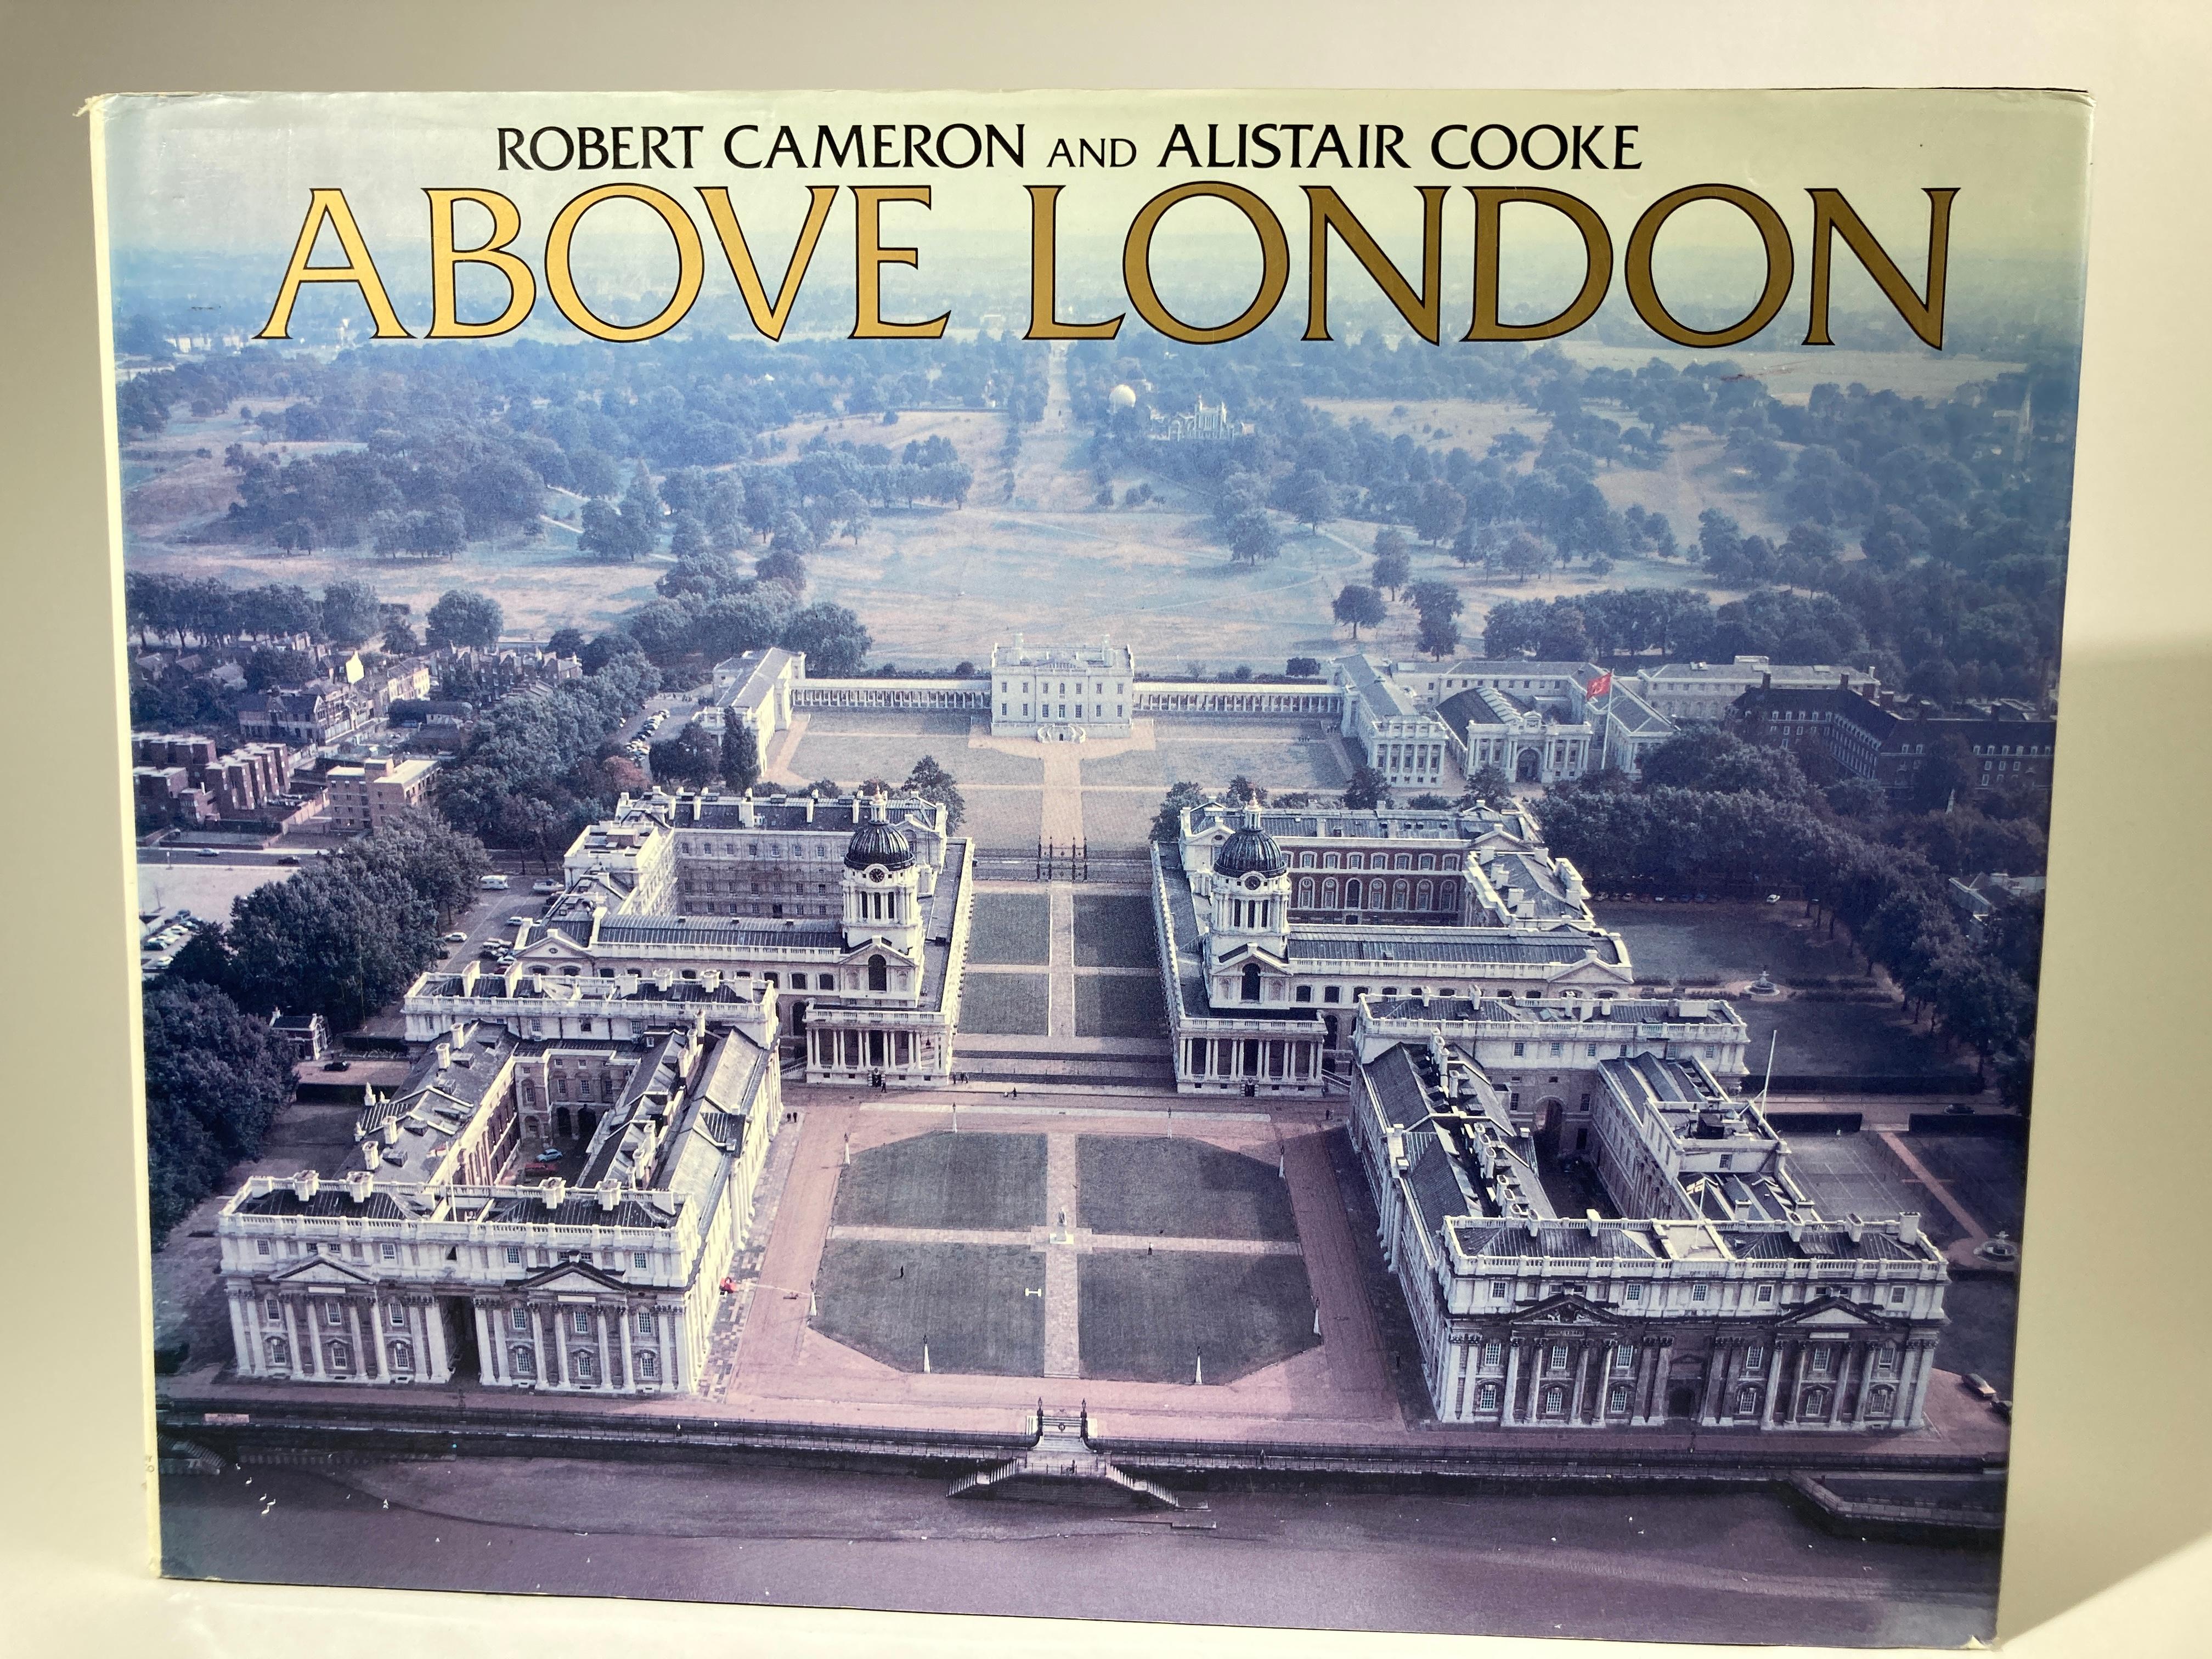 Above London. Visitors to England who marvel at this lush land on their first incoming flight now have a volume to treasure forever. Here are the famed gardens, the majestic estates, the granduer of centuries of architecture. Along with Robert